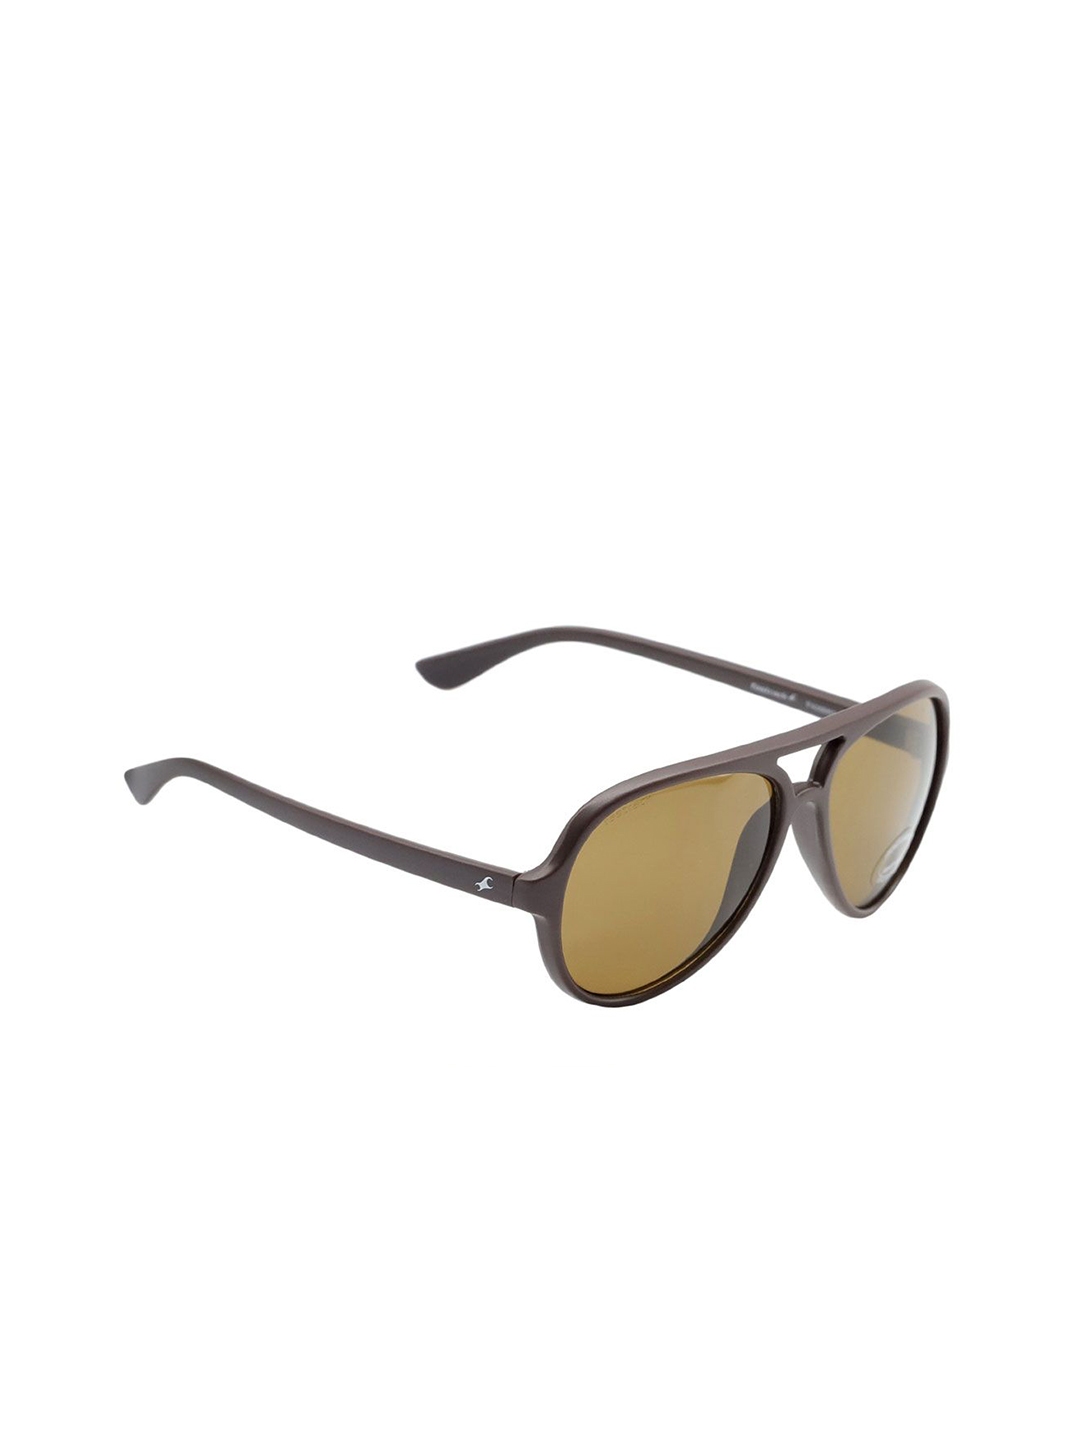 Buy Fastrack Unisex Brown Lens And Brown Aviator Sunglasses With Uv Protected Lens Sunglasses 